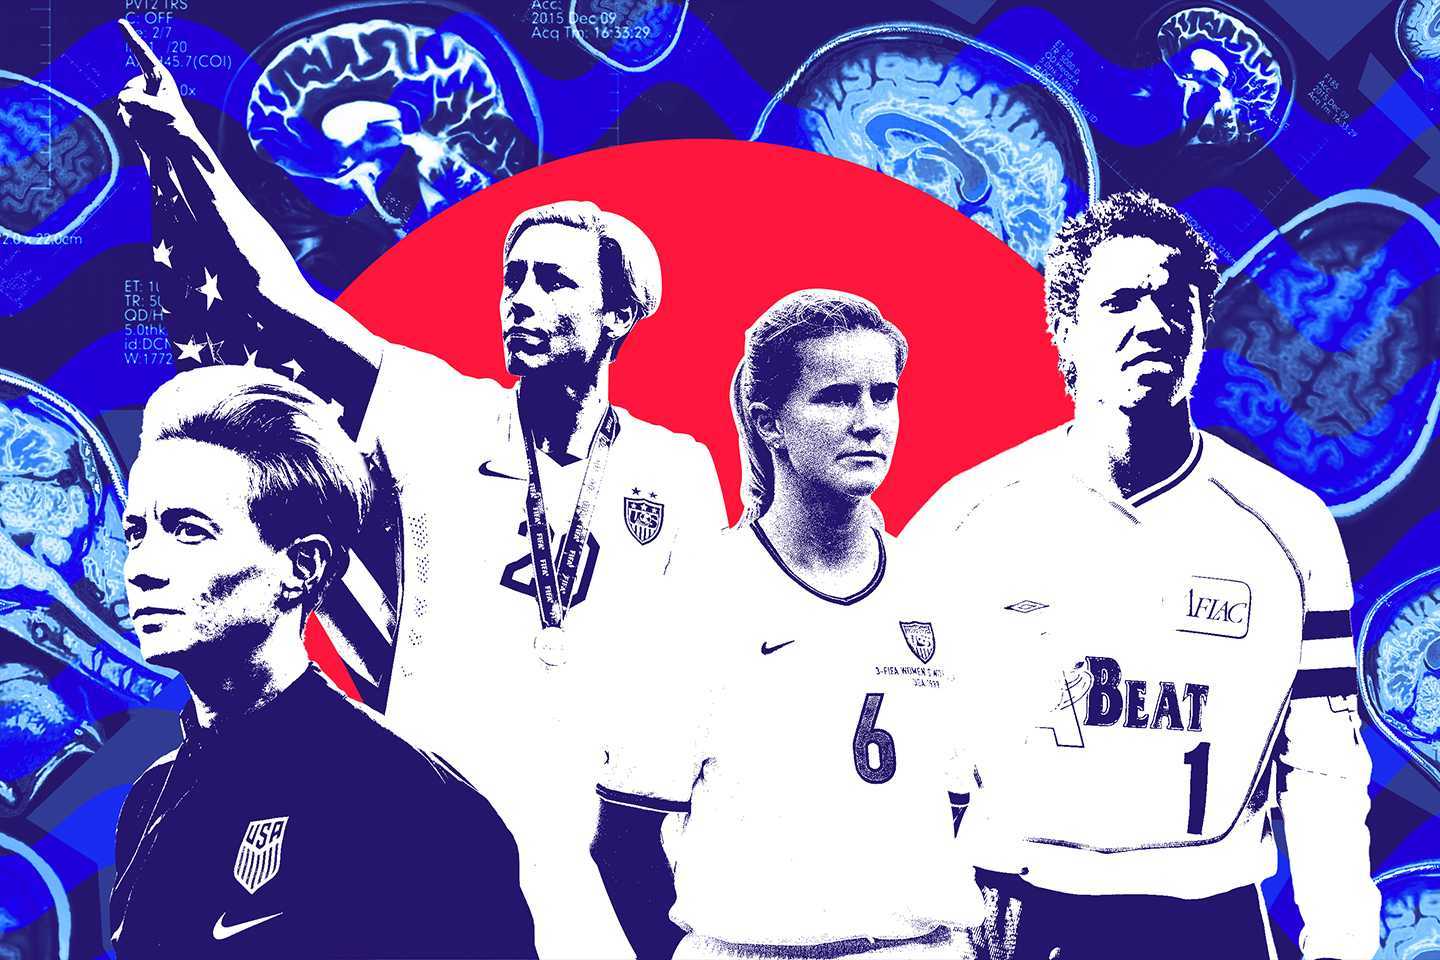 Do women soccer players have more concussions? This world cup and beyond,  here's how to keep our players safe